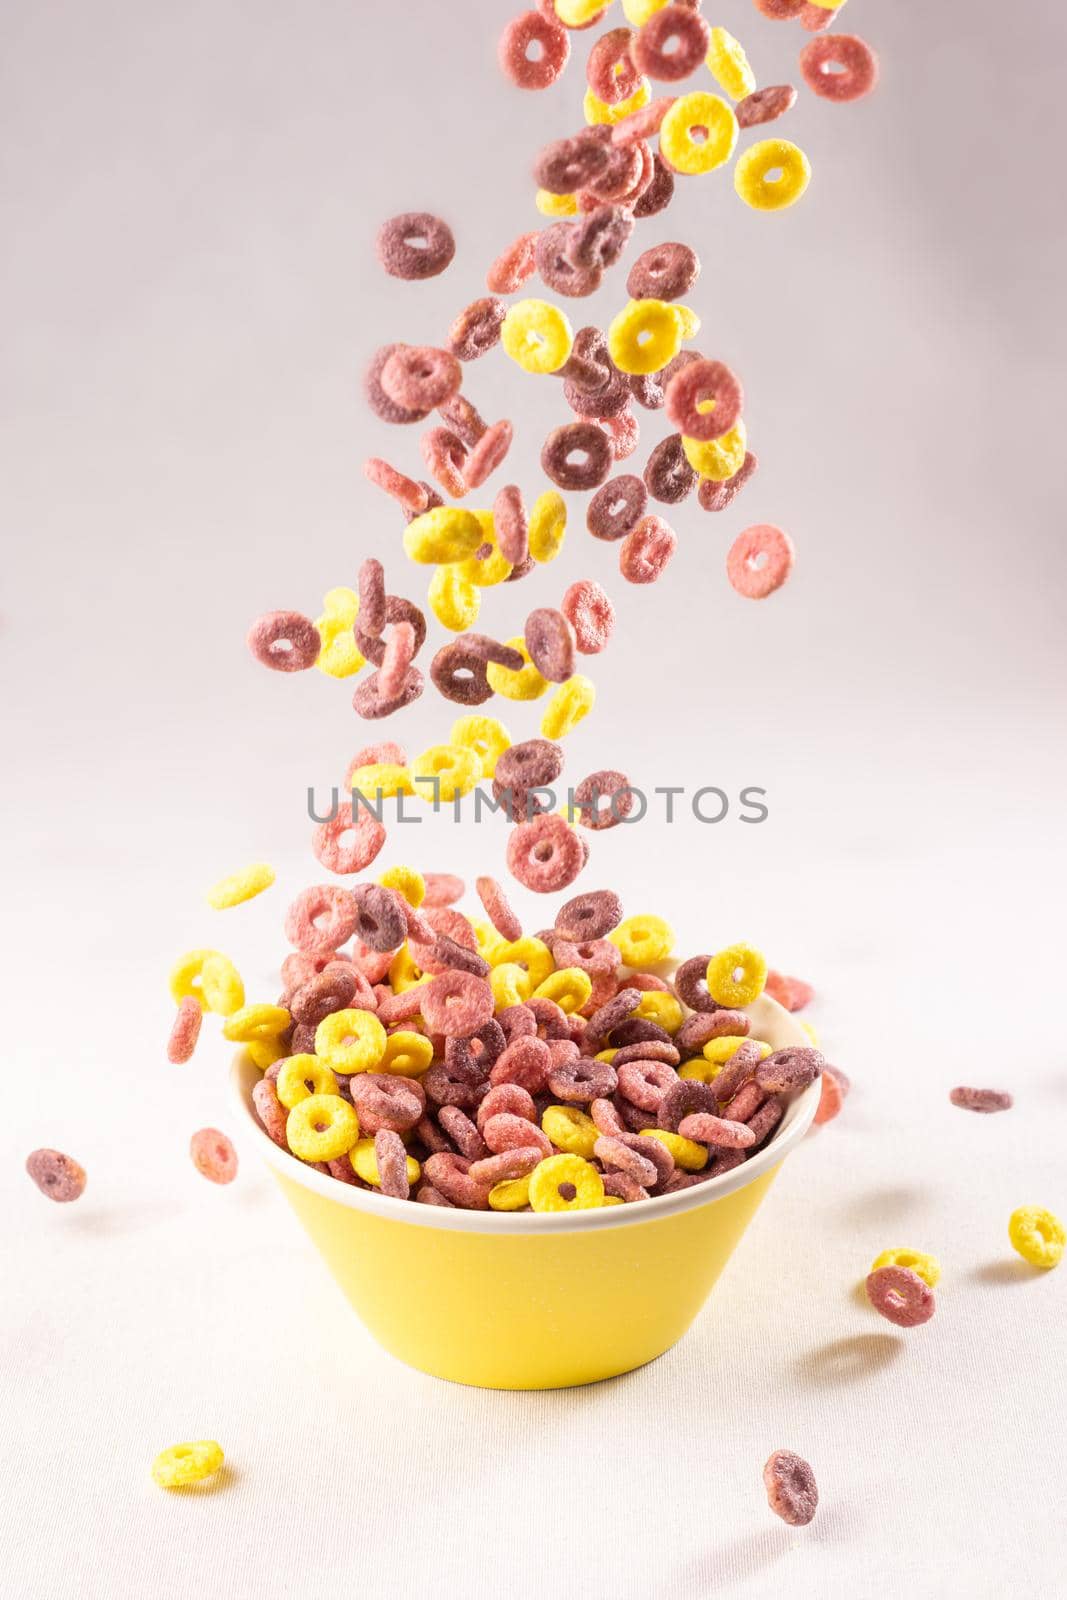 colored cereal rings falling into a yellow bowl on white background with soft side lighting